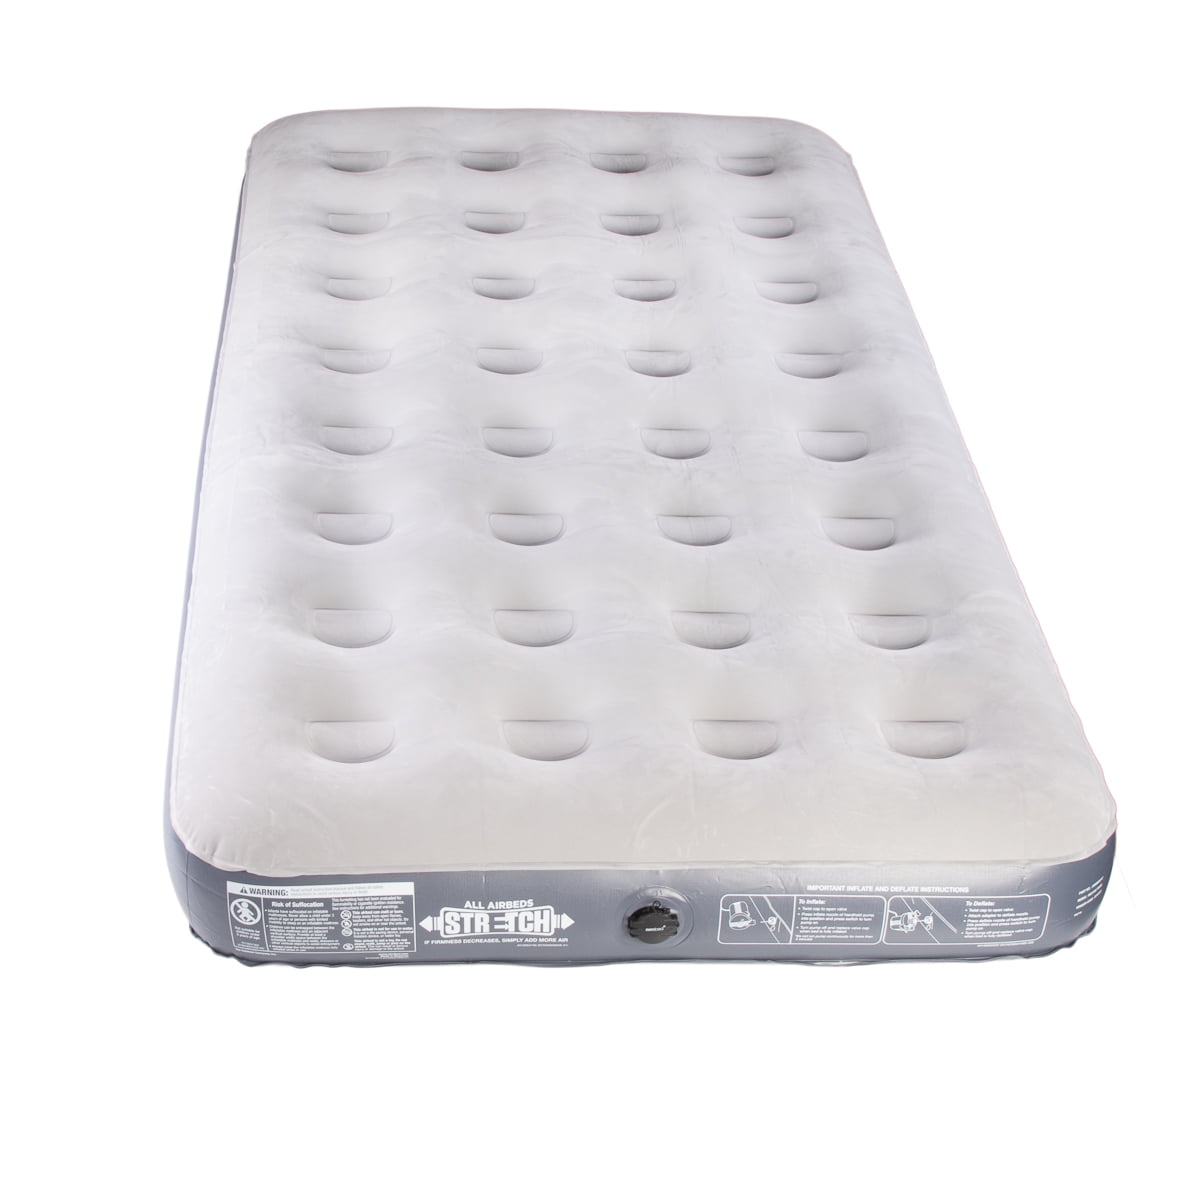 Opened Aerobed ExtraBed 8" Height Twin Air Mattress with Hand-held PumpNew 